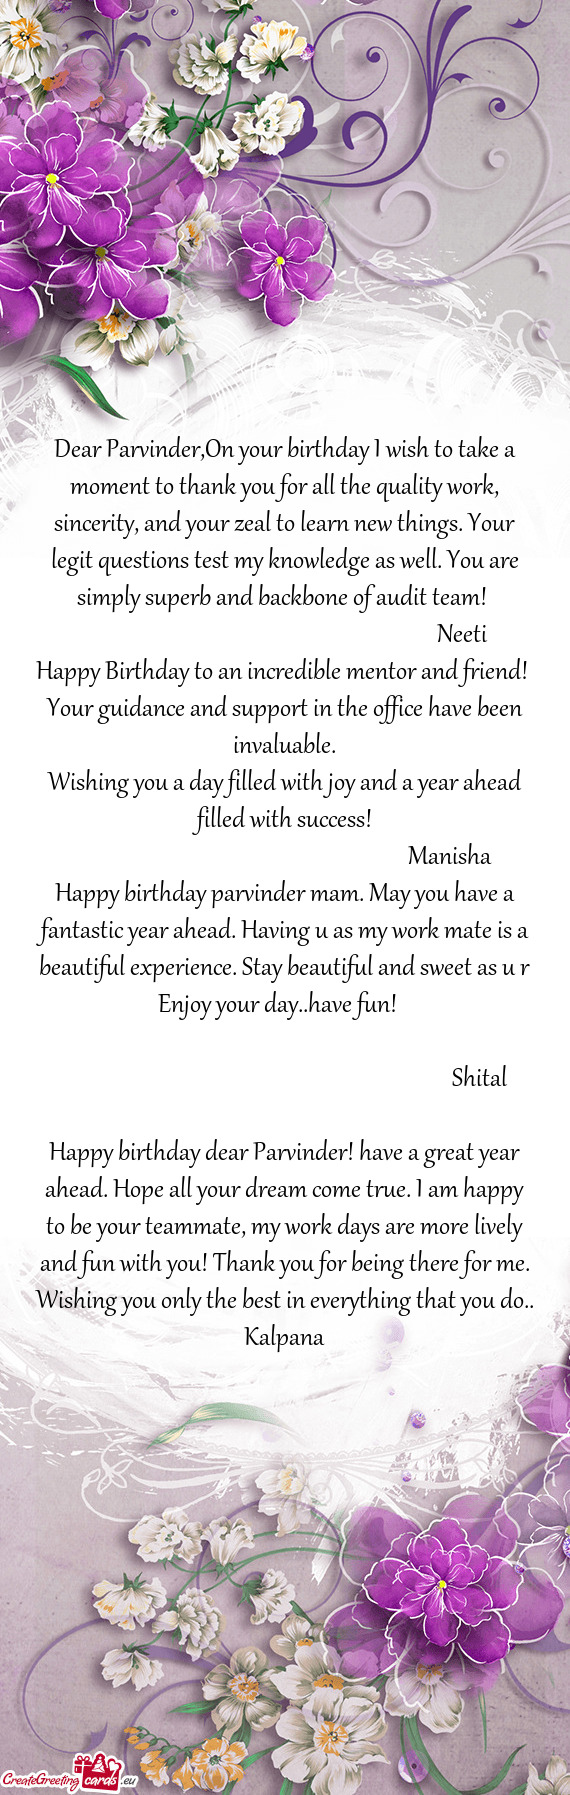 Dear Parvinder,On your birthday I wish to take a moment to thank you for all the quality work, since